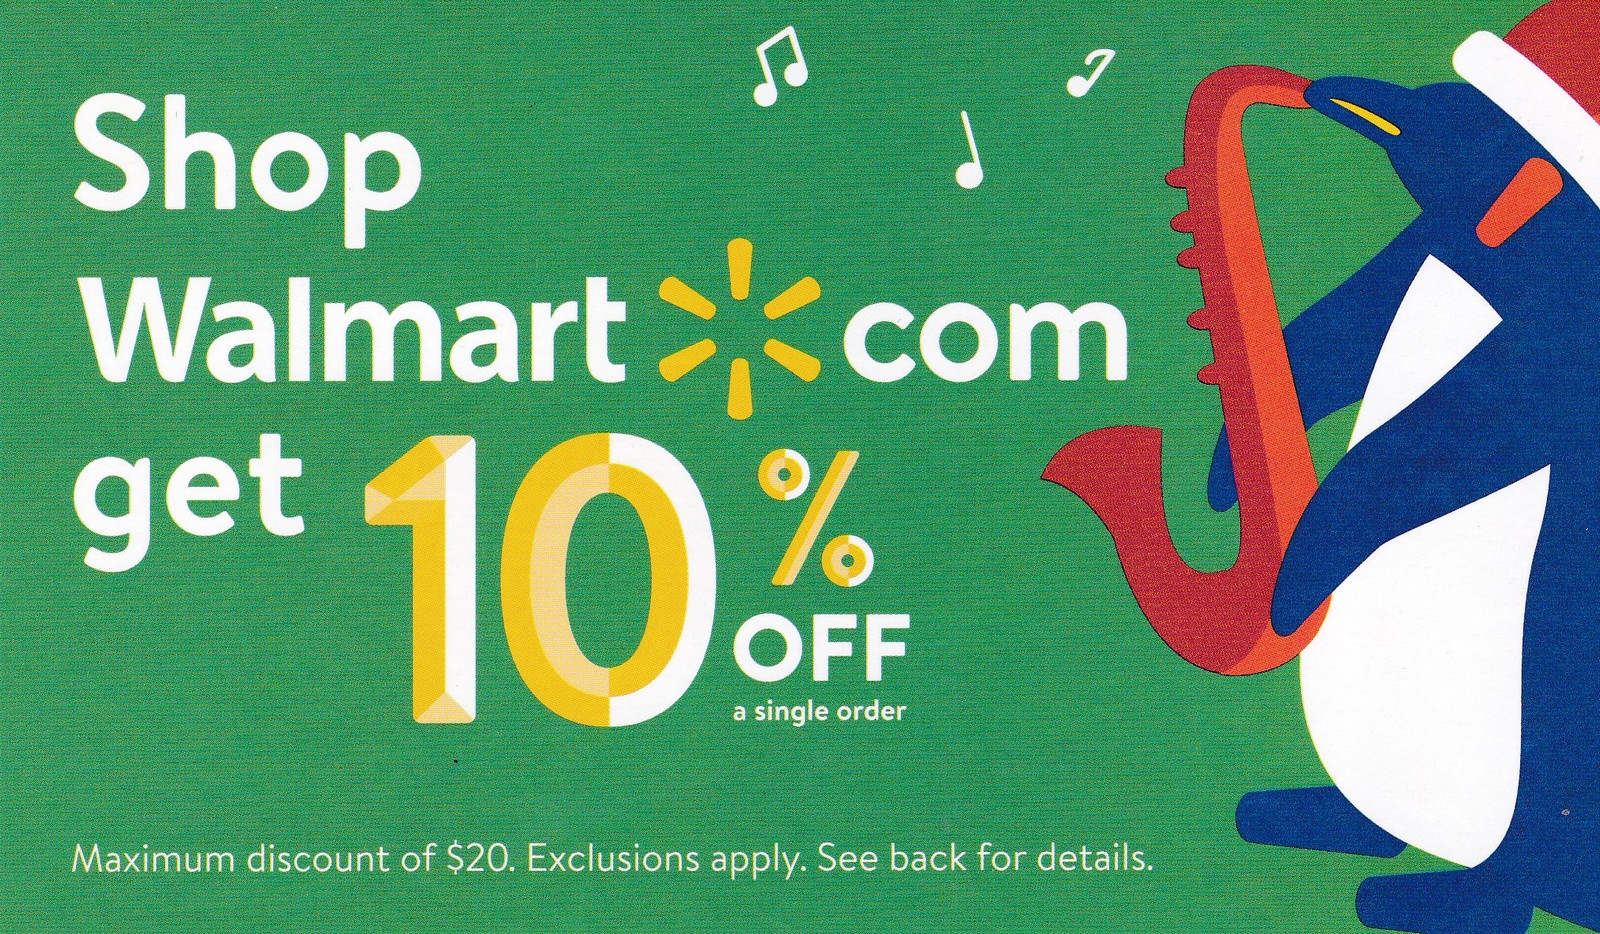 Coupon for 10% off of Walmart's Website